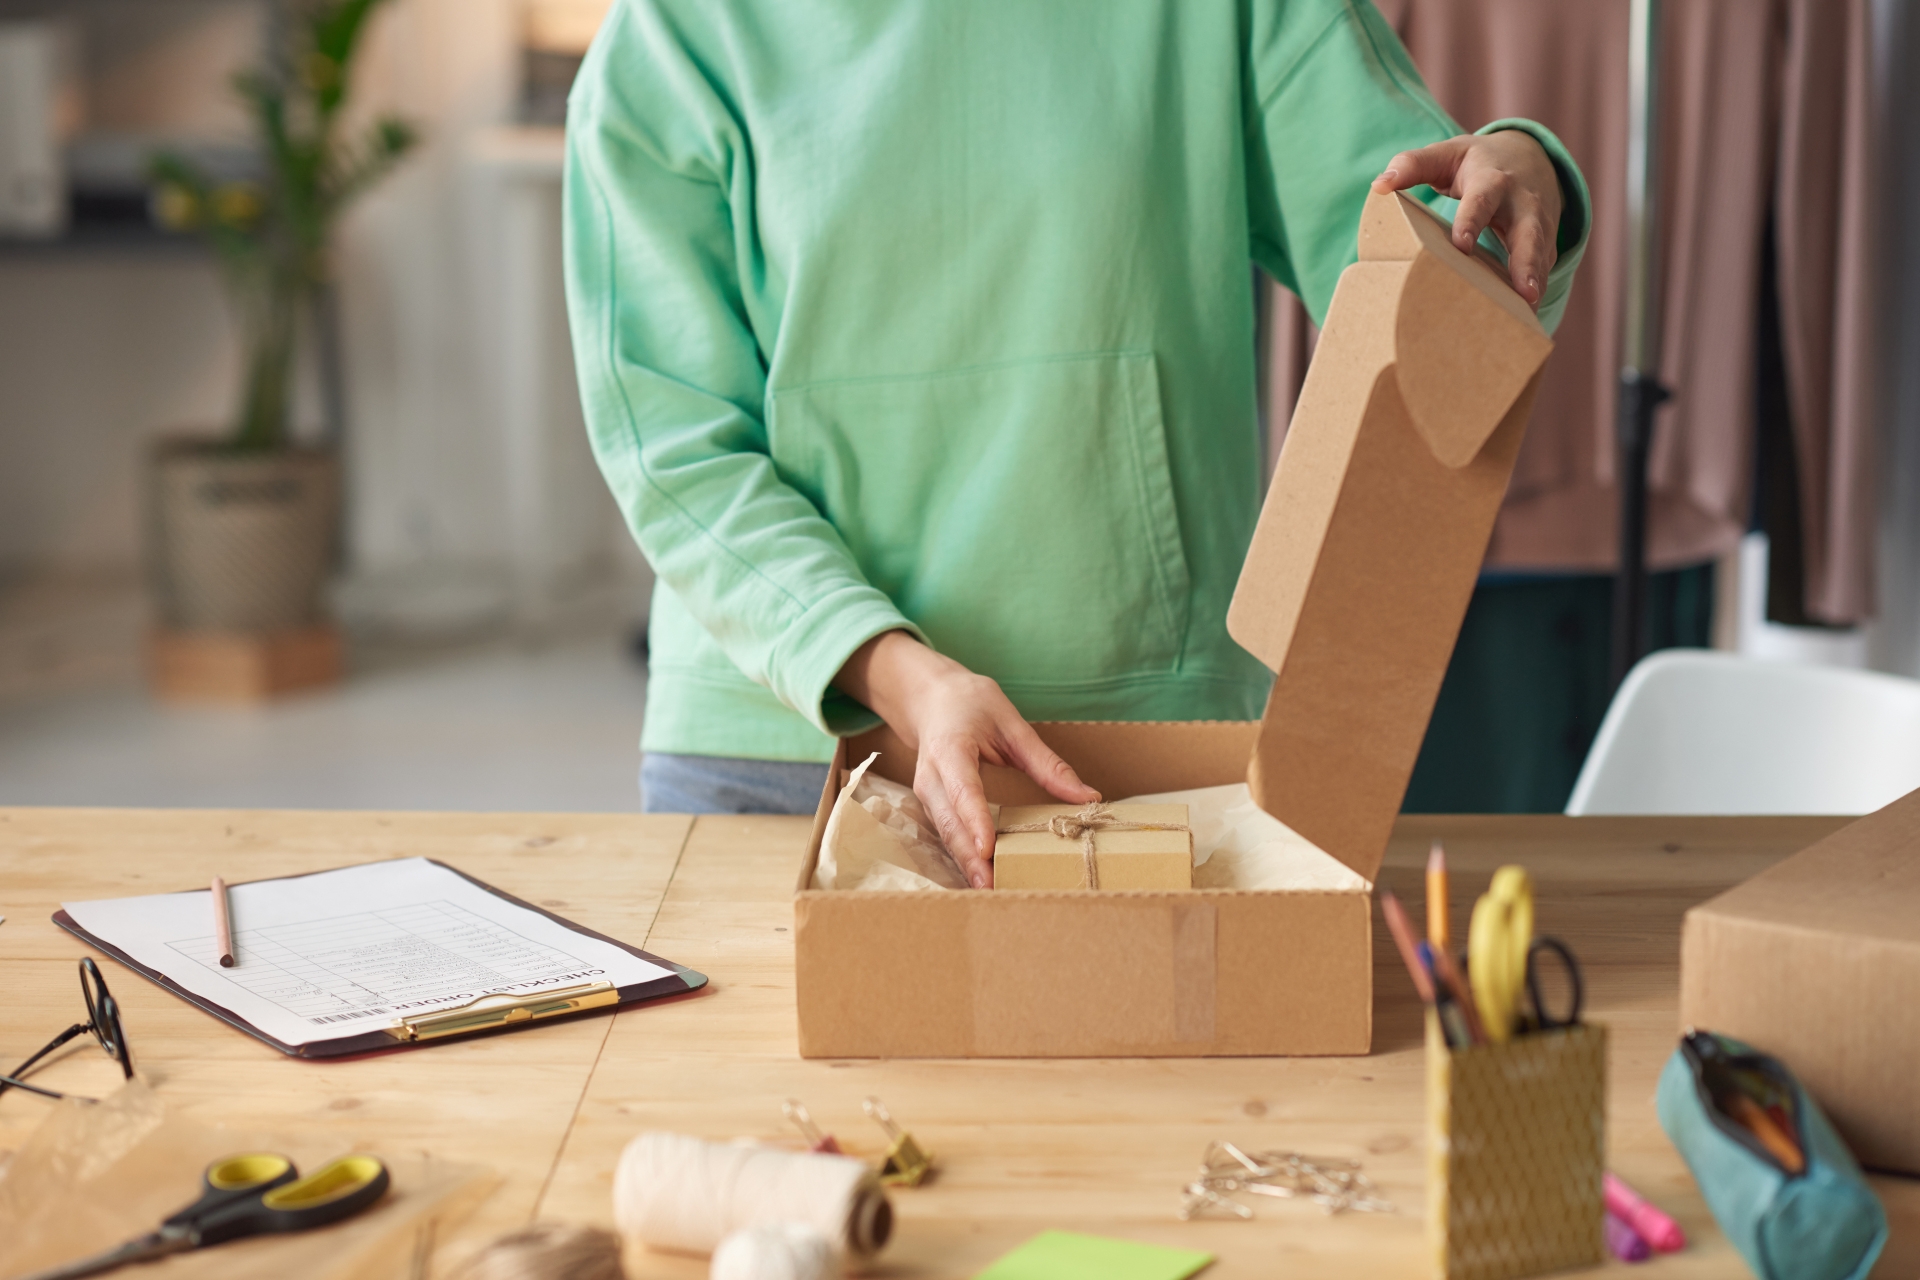 Green Street, Getty Images - Putting present in parcel